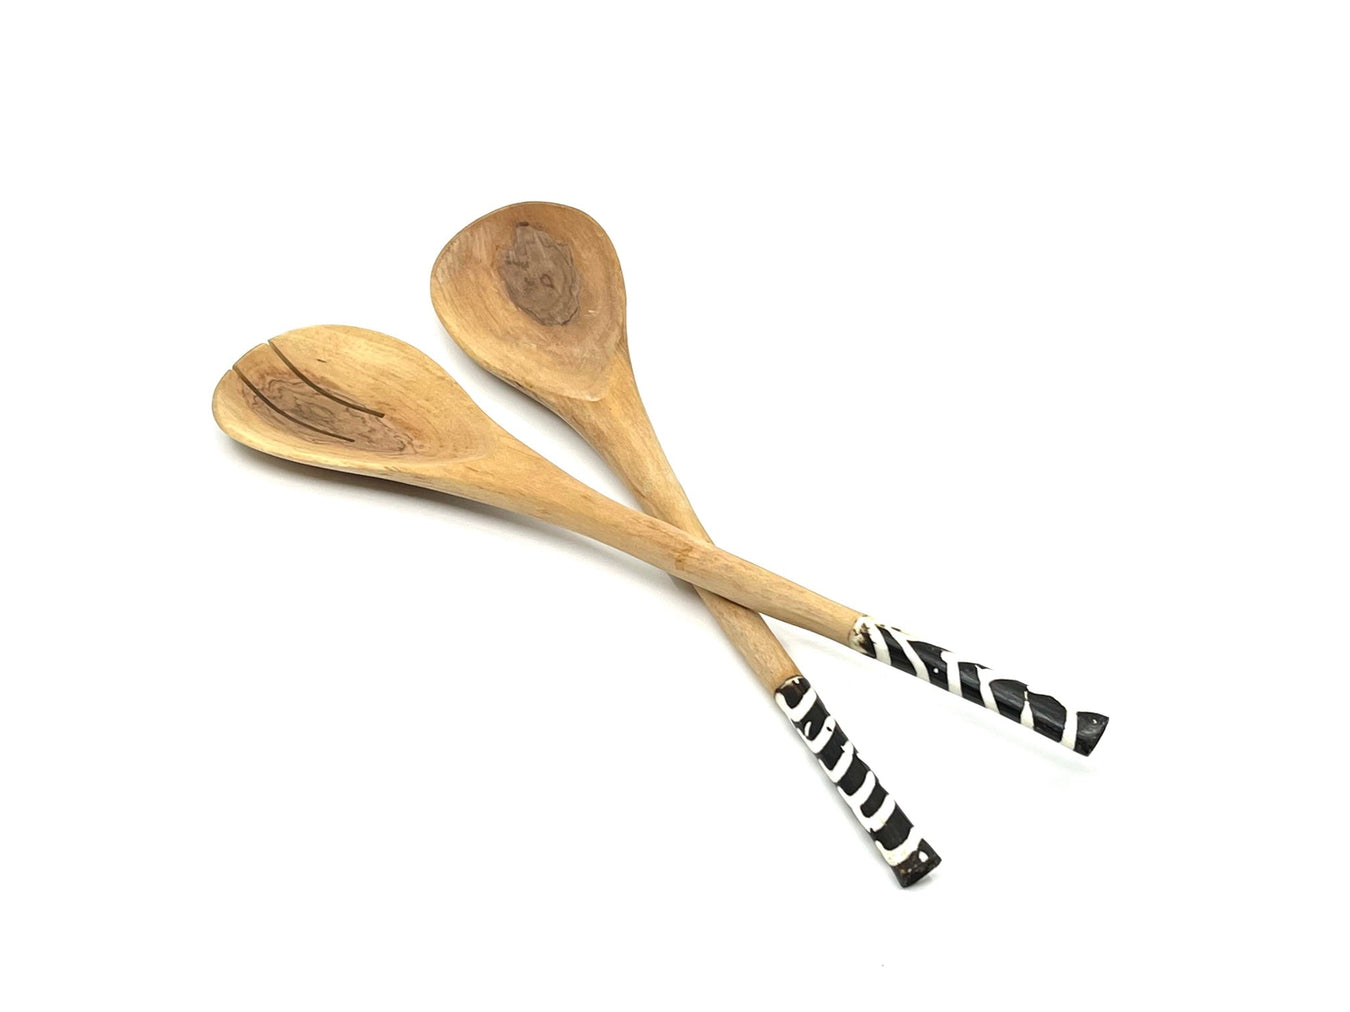 South African Kitchenware